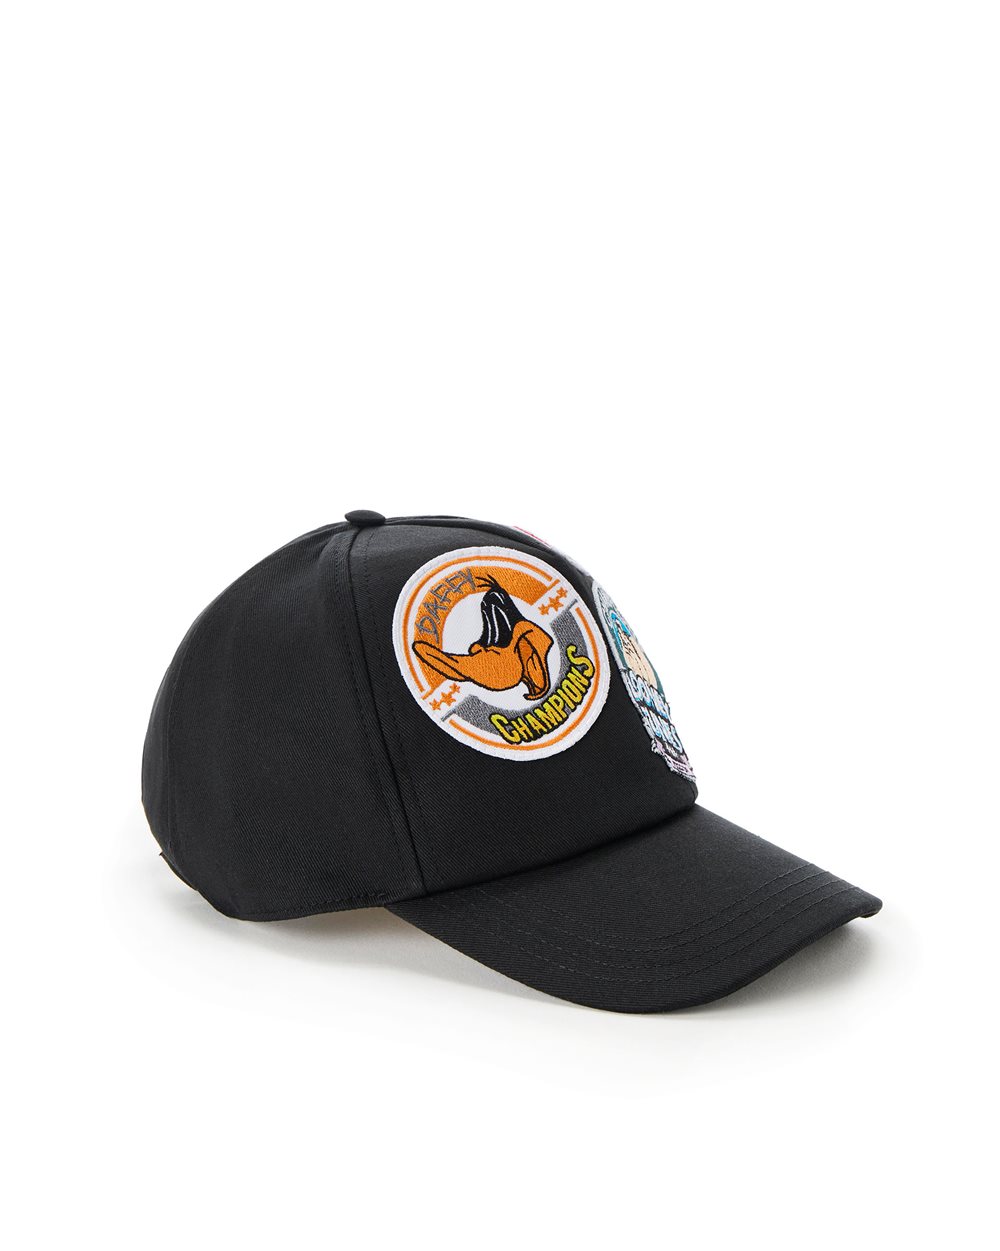 Baseball cap with cartoon patches and logo - Accessories | Iceberg - Official Website